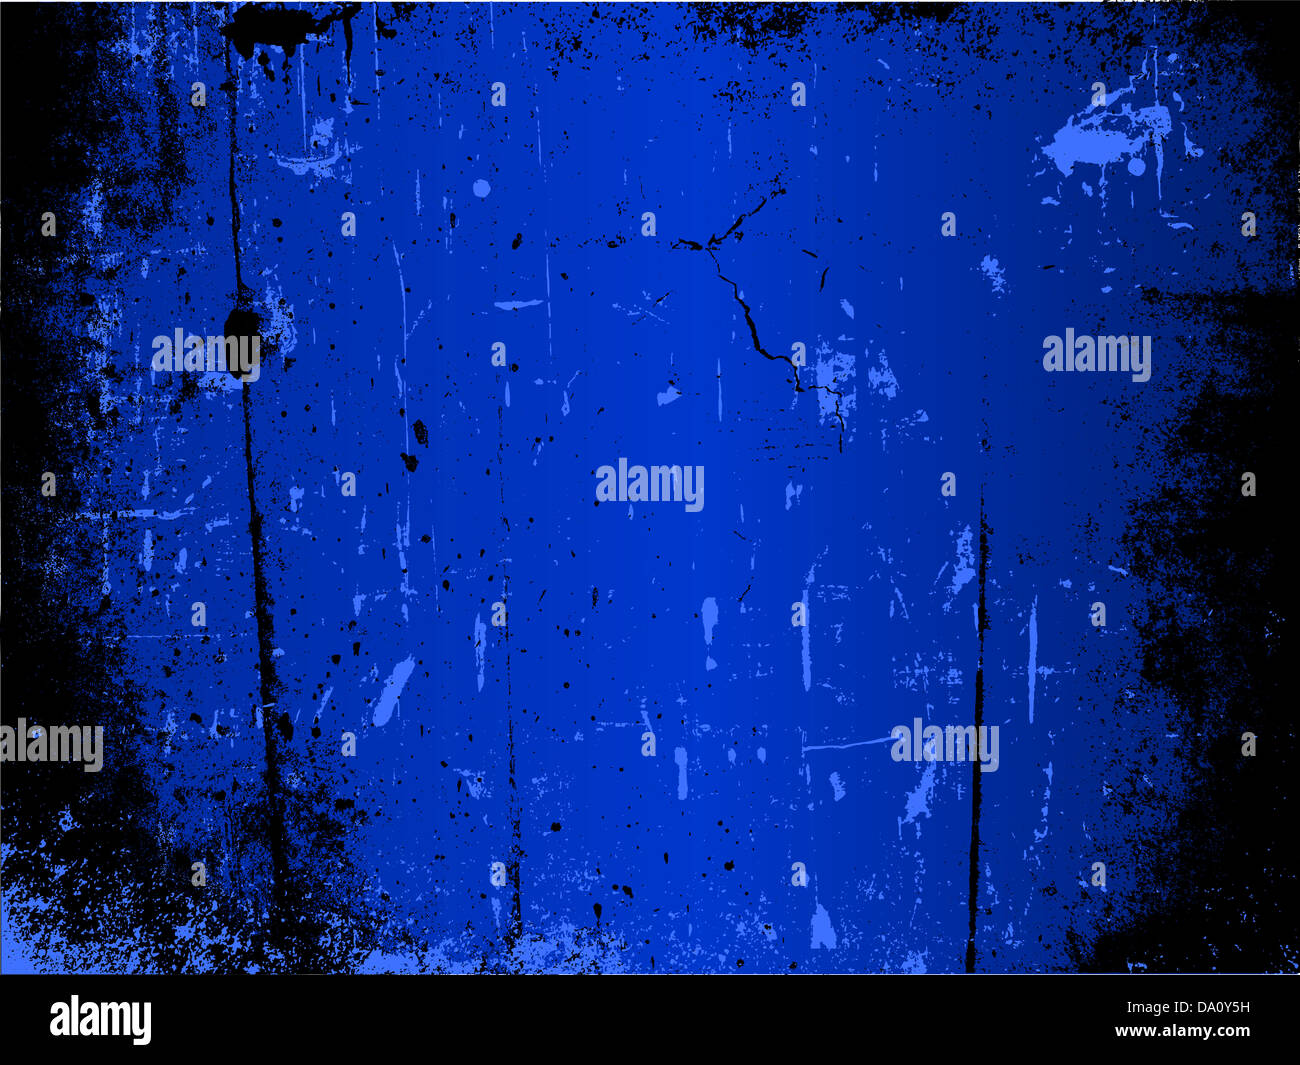 Detailed grunge background in shades of blue Stock Photo - Alamy